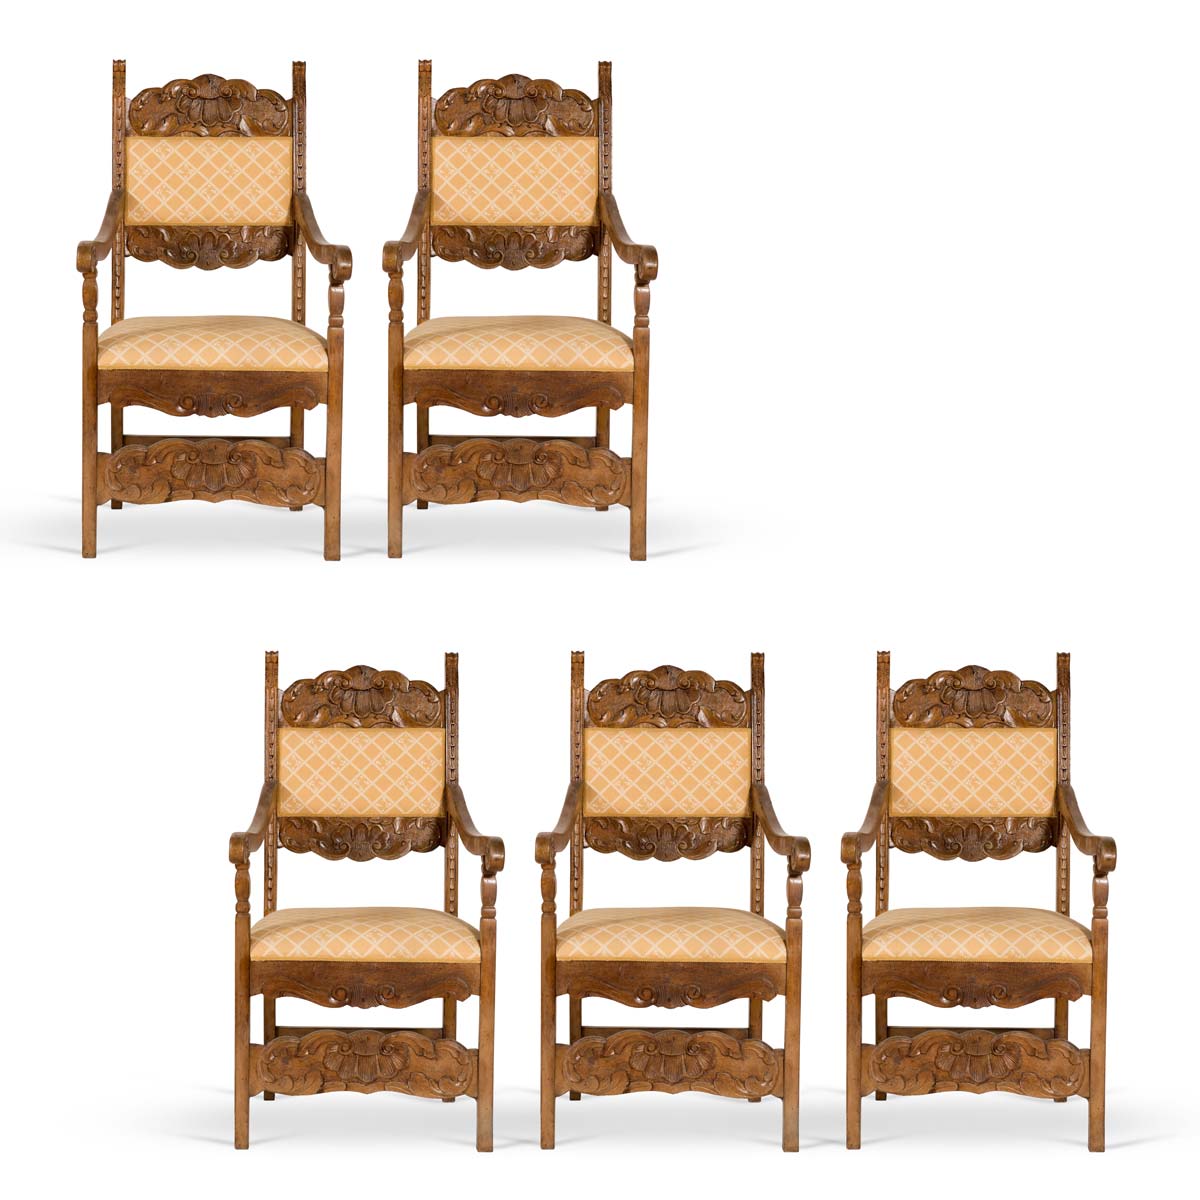 Group of five carved walnut armchairs, 20th Century.